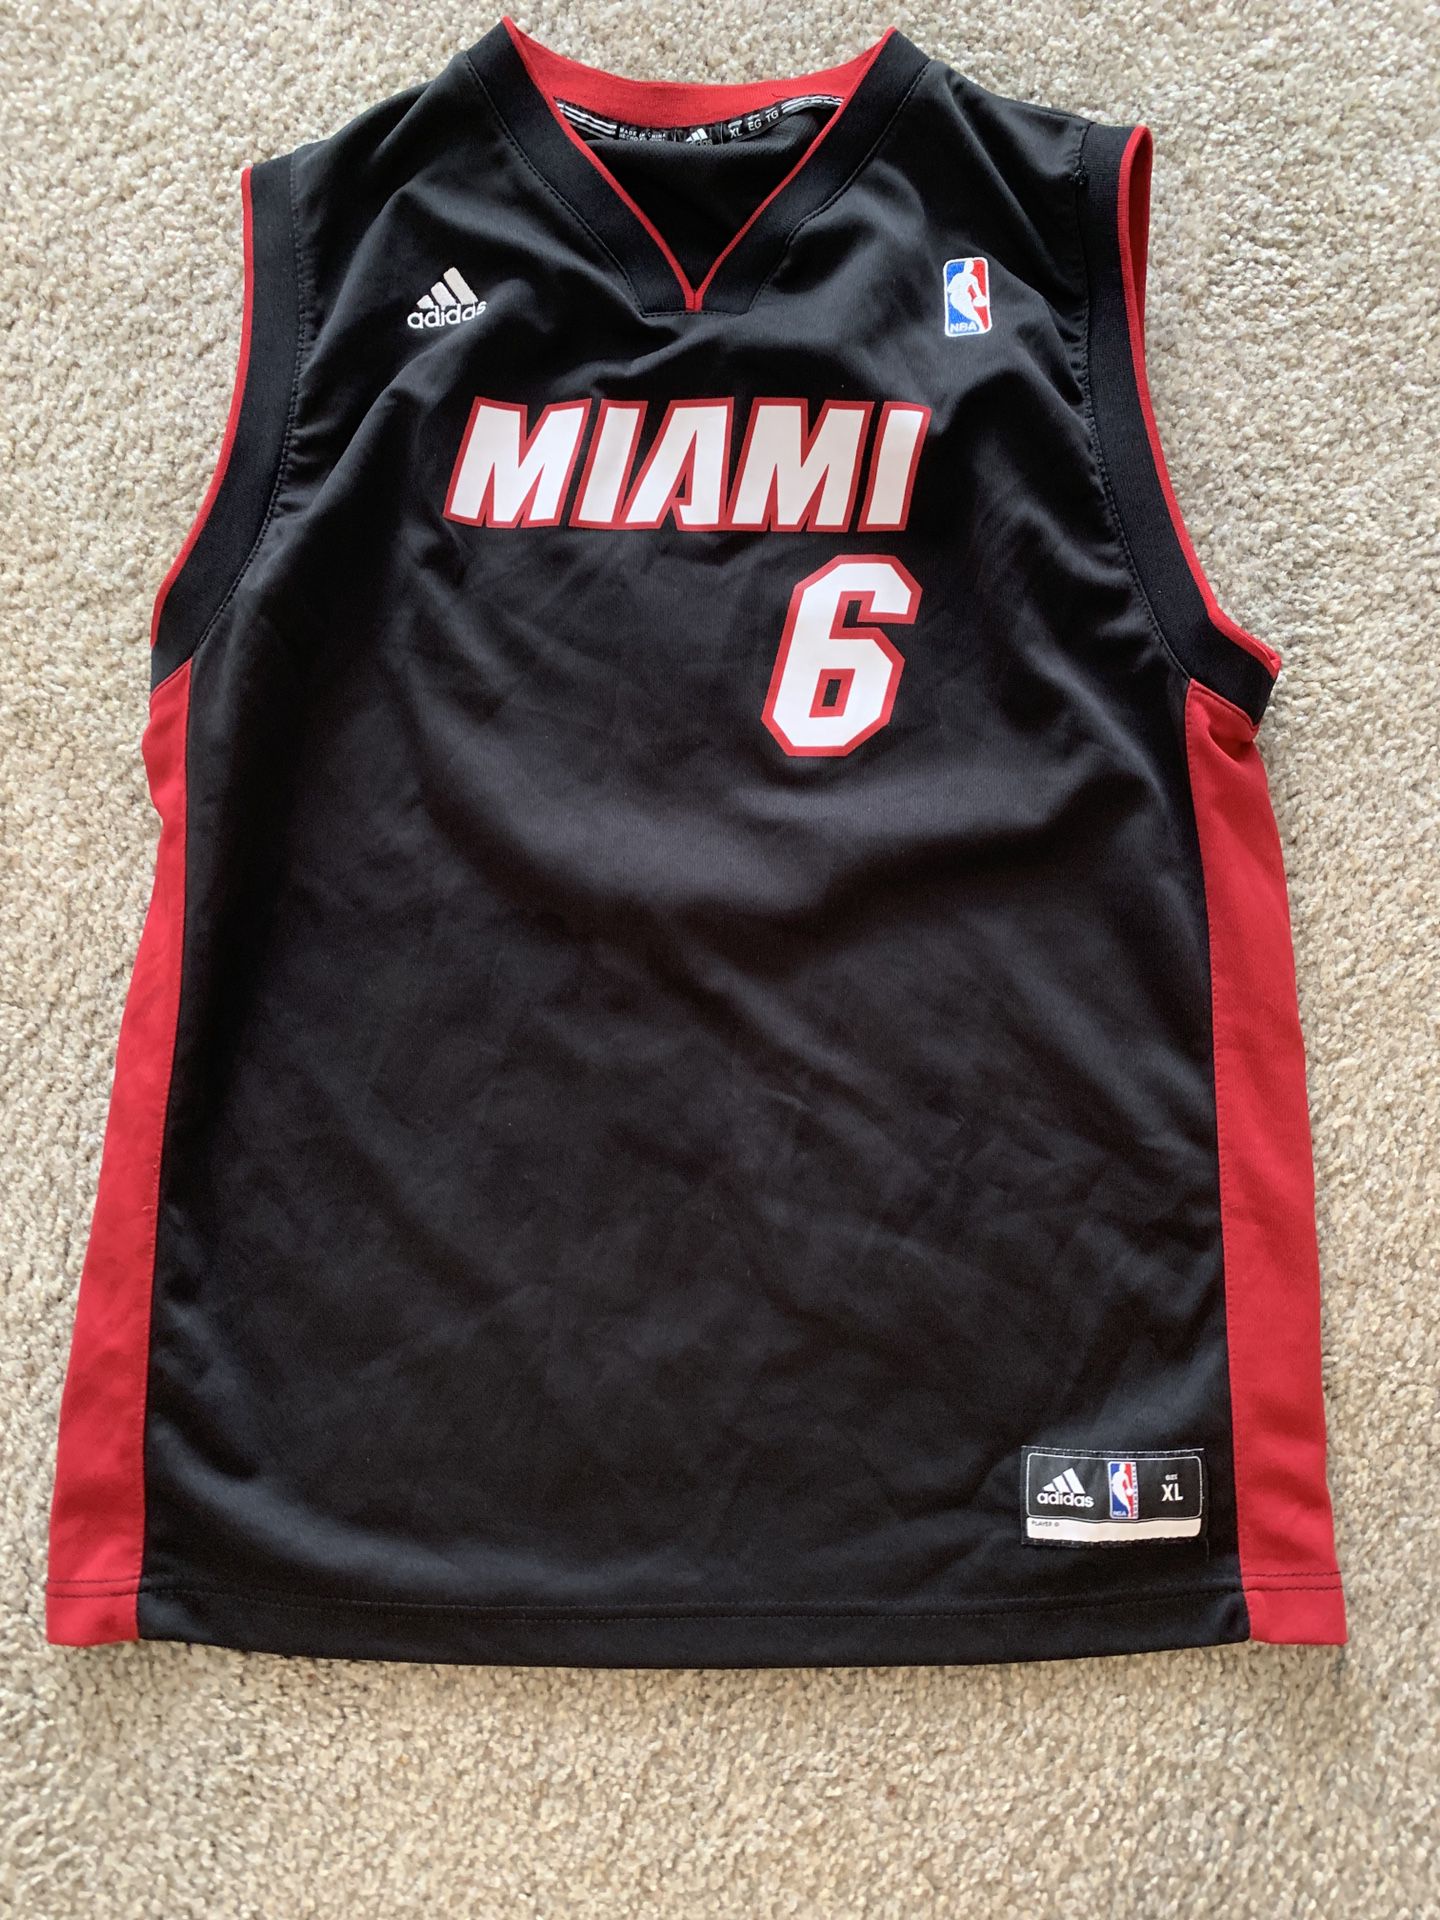 Lebron James Jersey for Sale in Sidney, OH - OfferUp